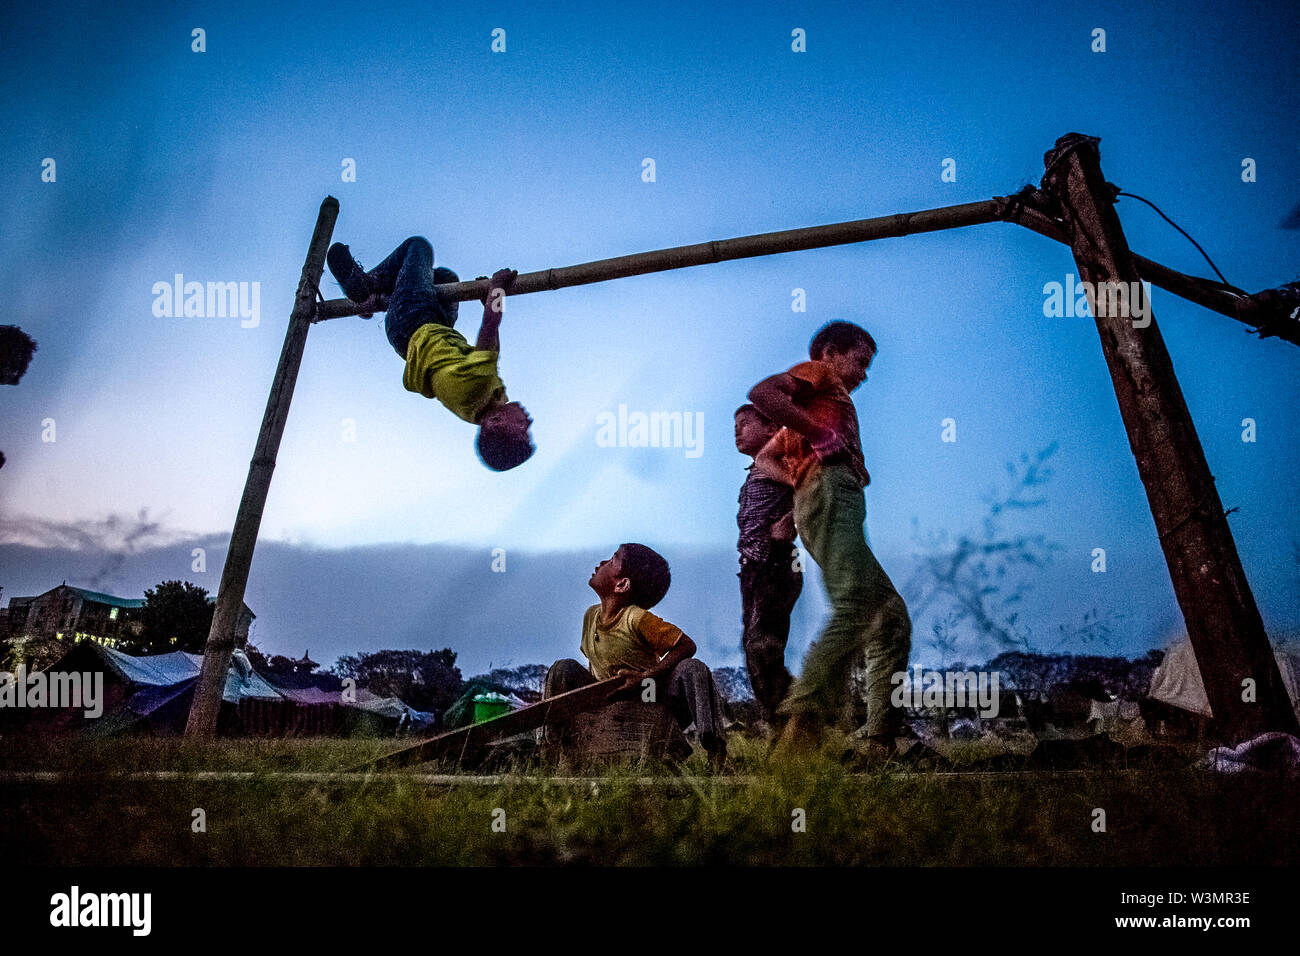 Children play on a bamboo pole at the temporary shelter center in Maidan, Kathmandu, after the 7.8 magnitude earthquake that struck Nepal at 11:56 am, on 25th April, 2015. Kathmandu, Nepal. May 1, 2015. Stock Photo